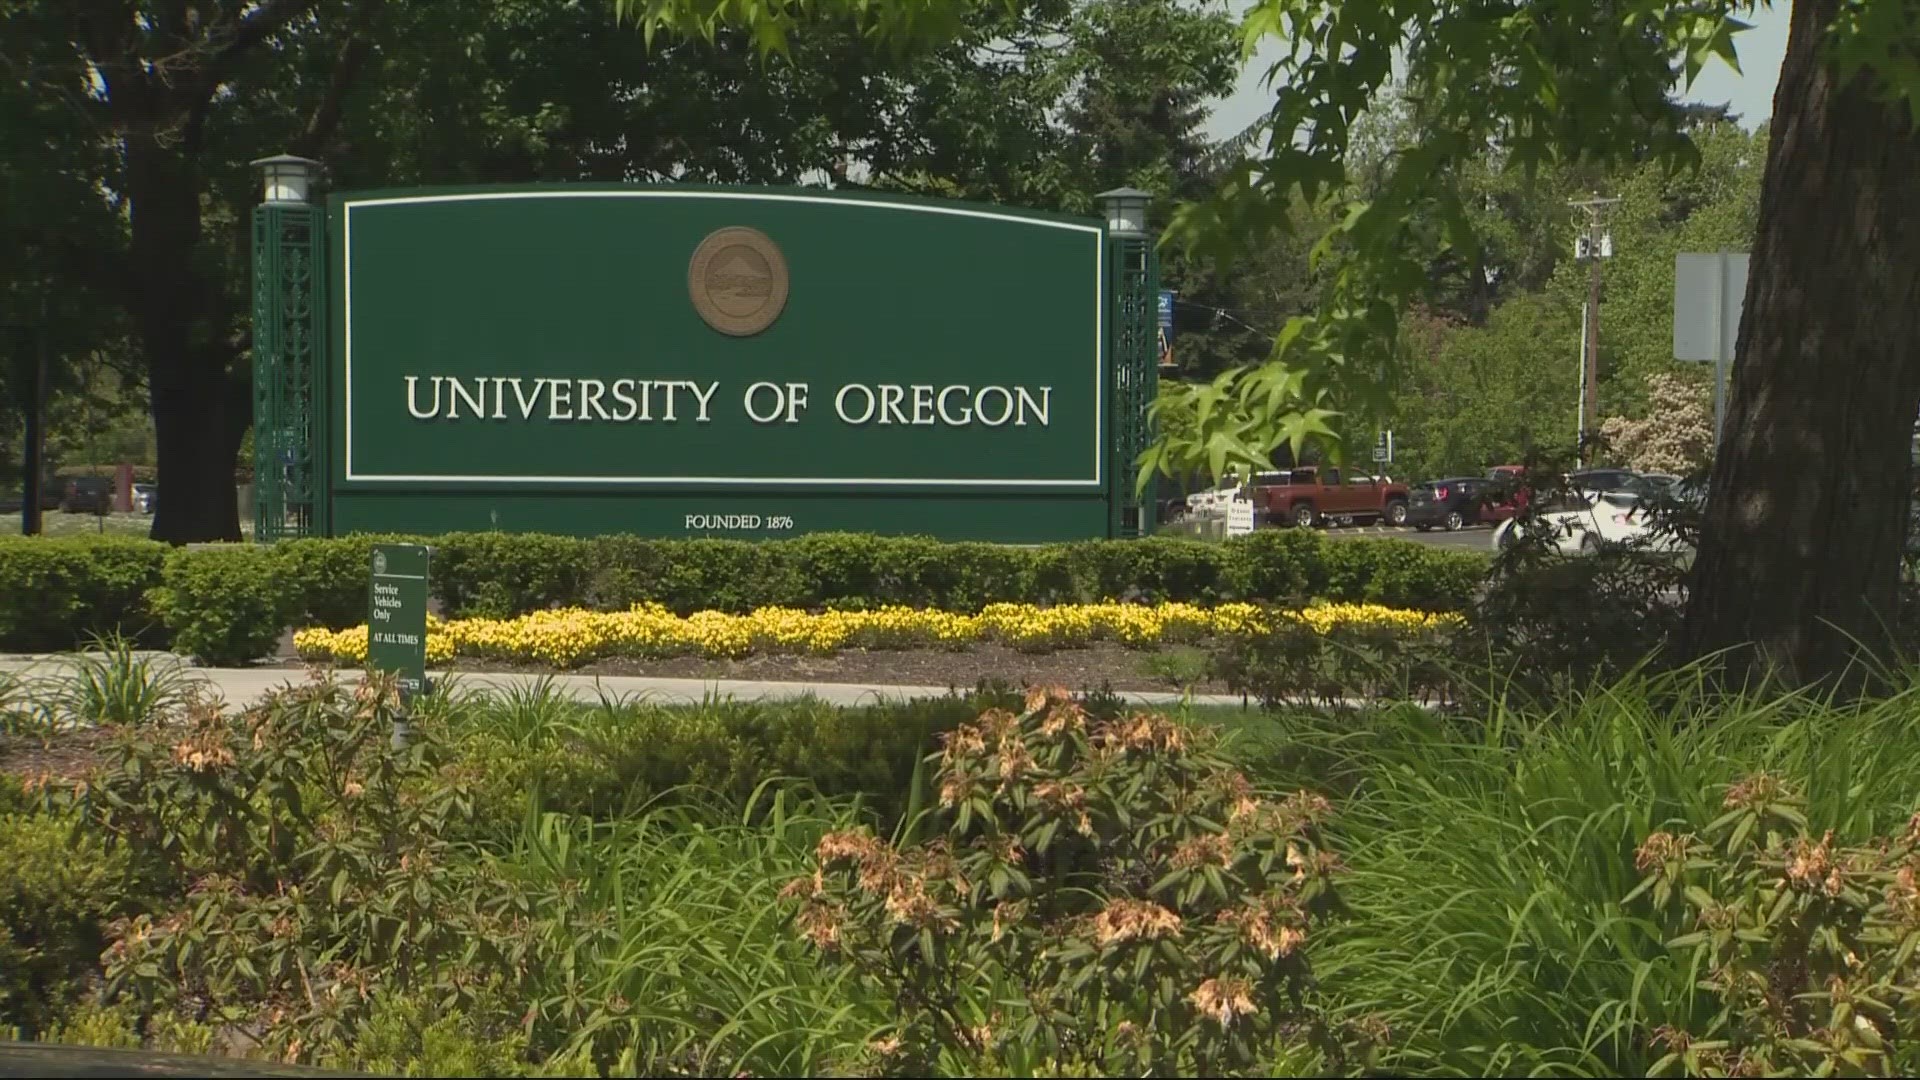 Those working to lessen the effects of wildfire smoke got a boost.  An $800,000 grant will go to launch the Wildfire Smoke Research and Practice Center at UO.